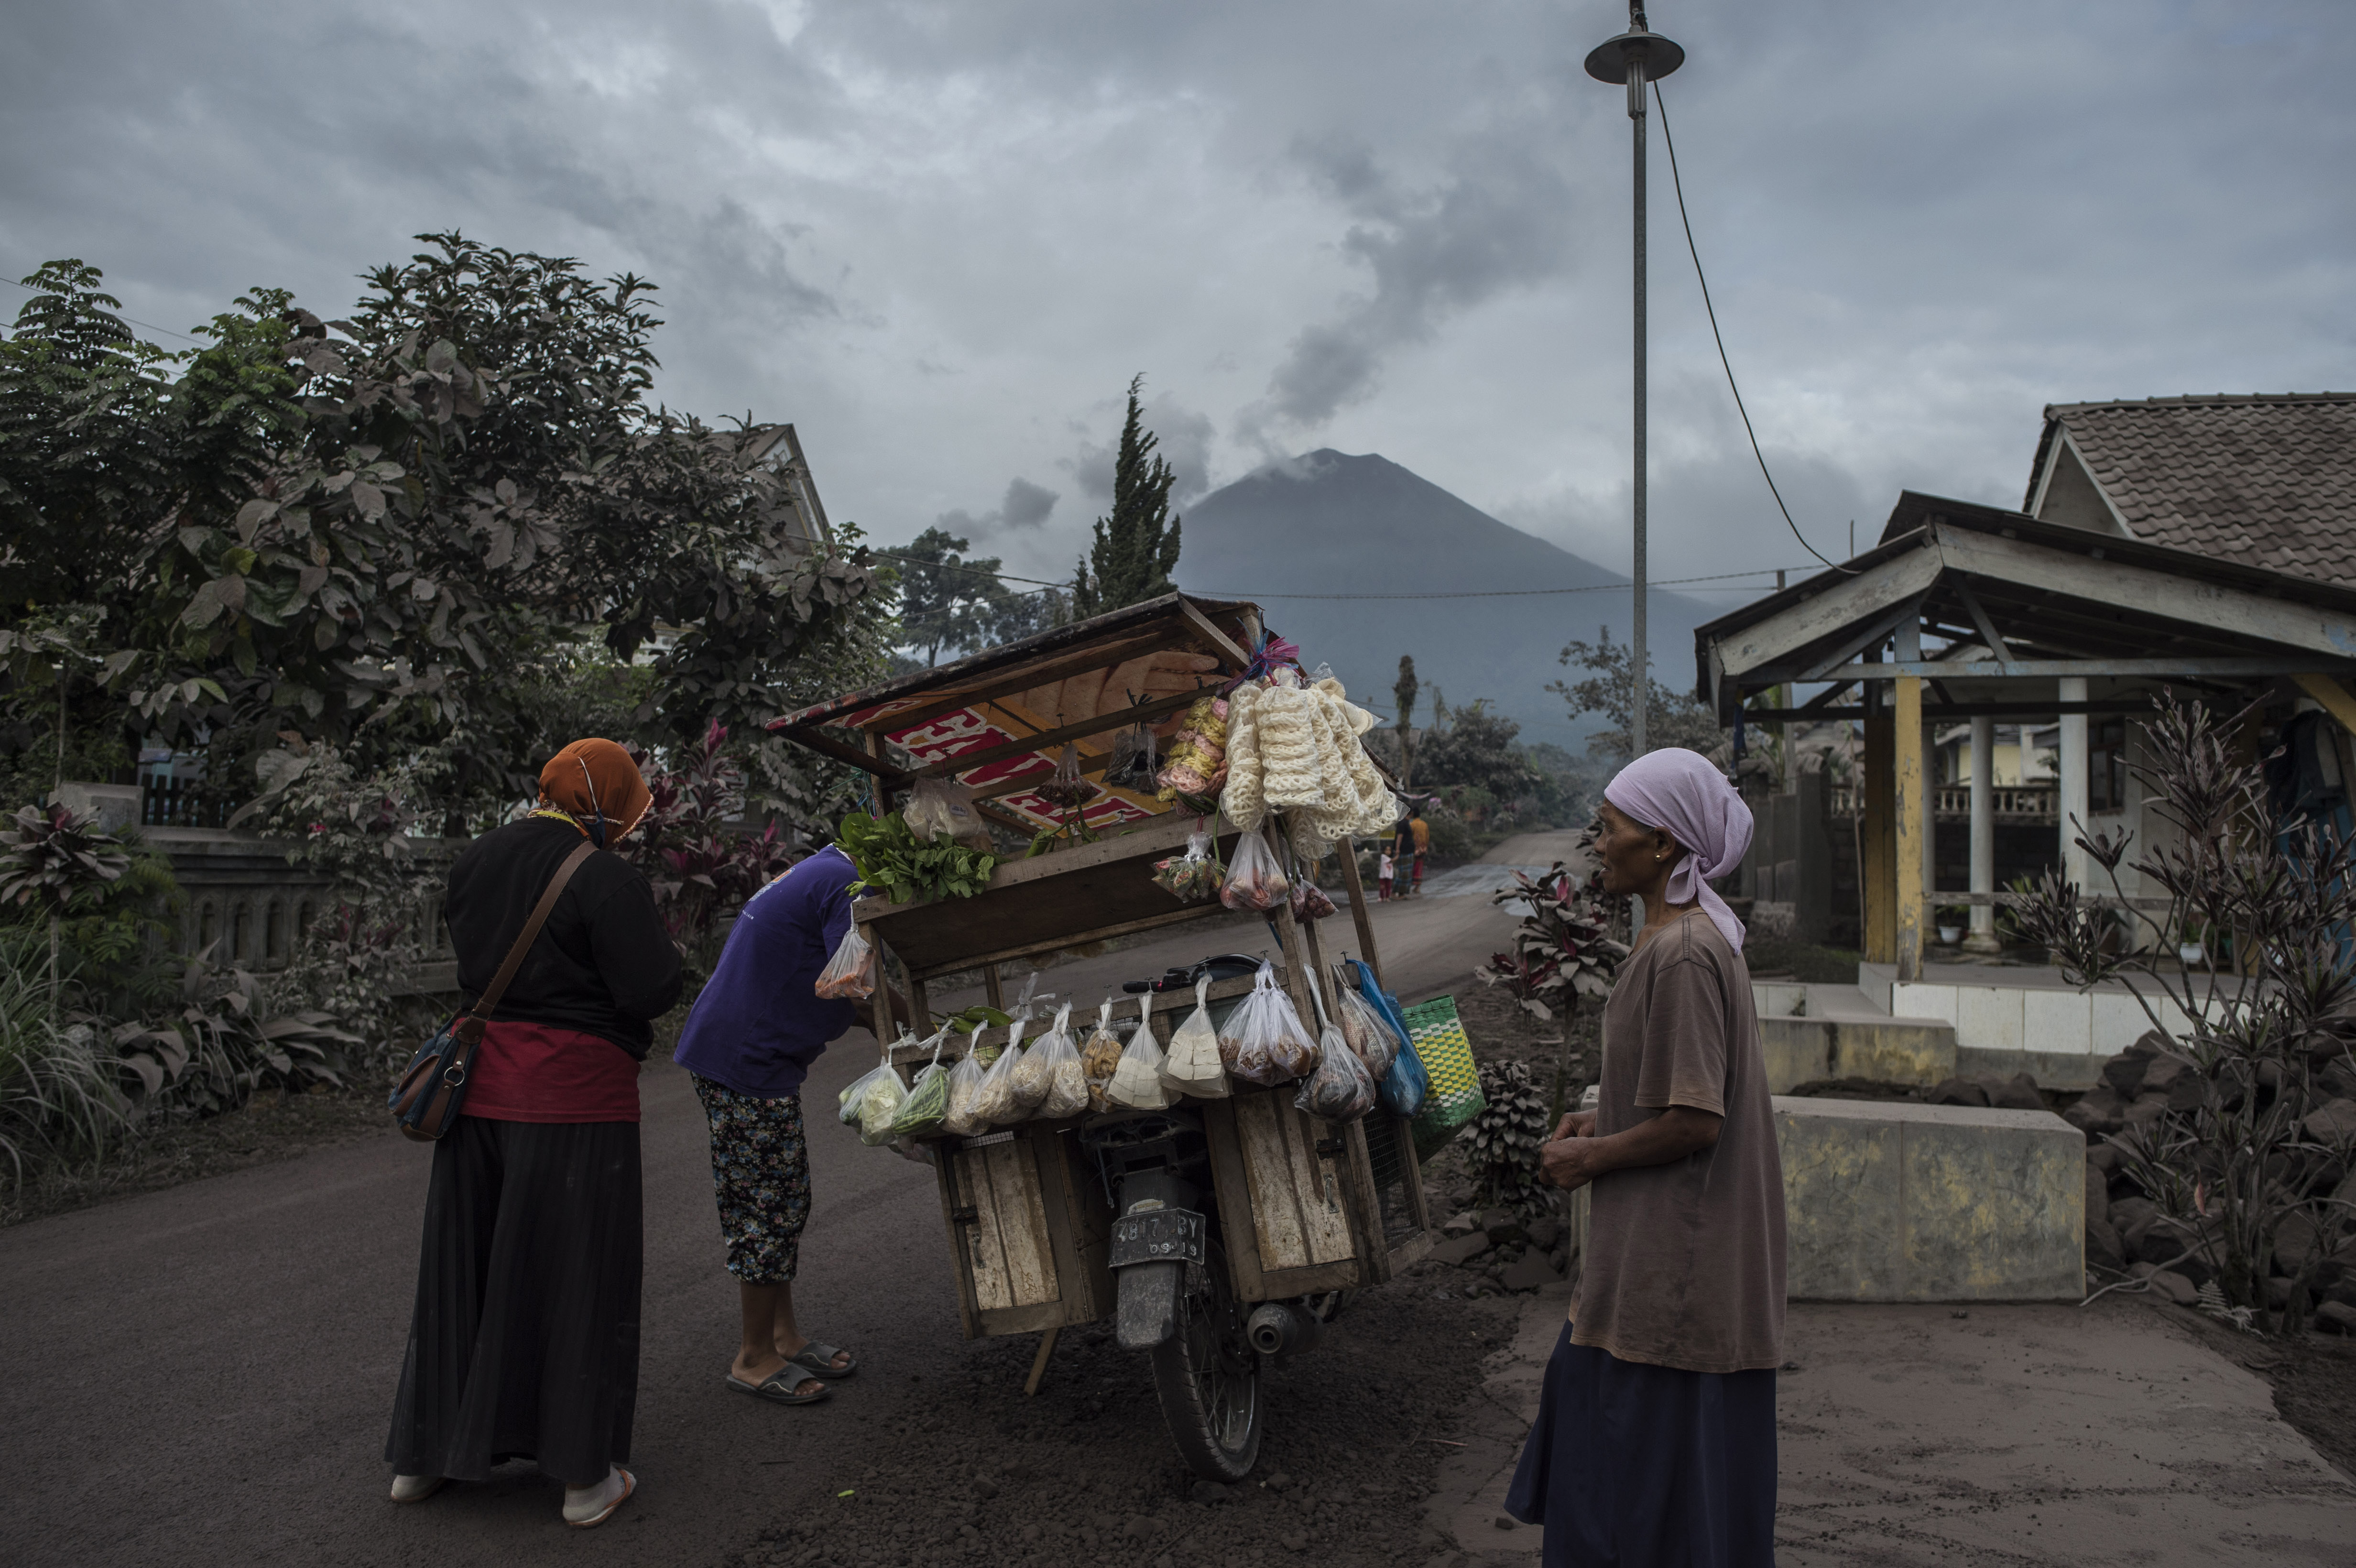 Villagers in Lumajang, East Java, the day before the eruption. (PHOTO: AFP / Juni Kriswanto)